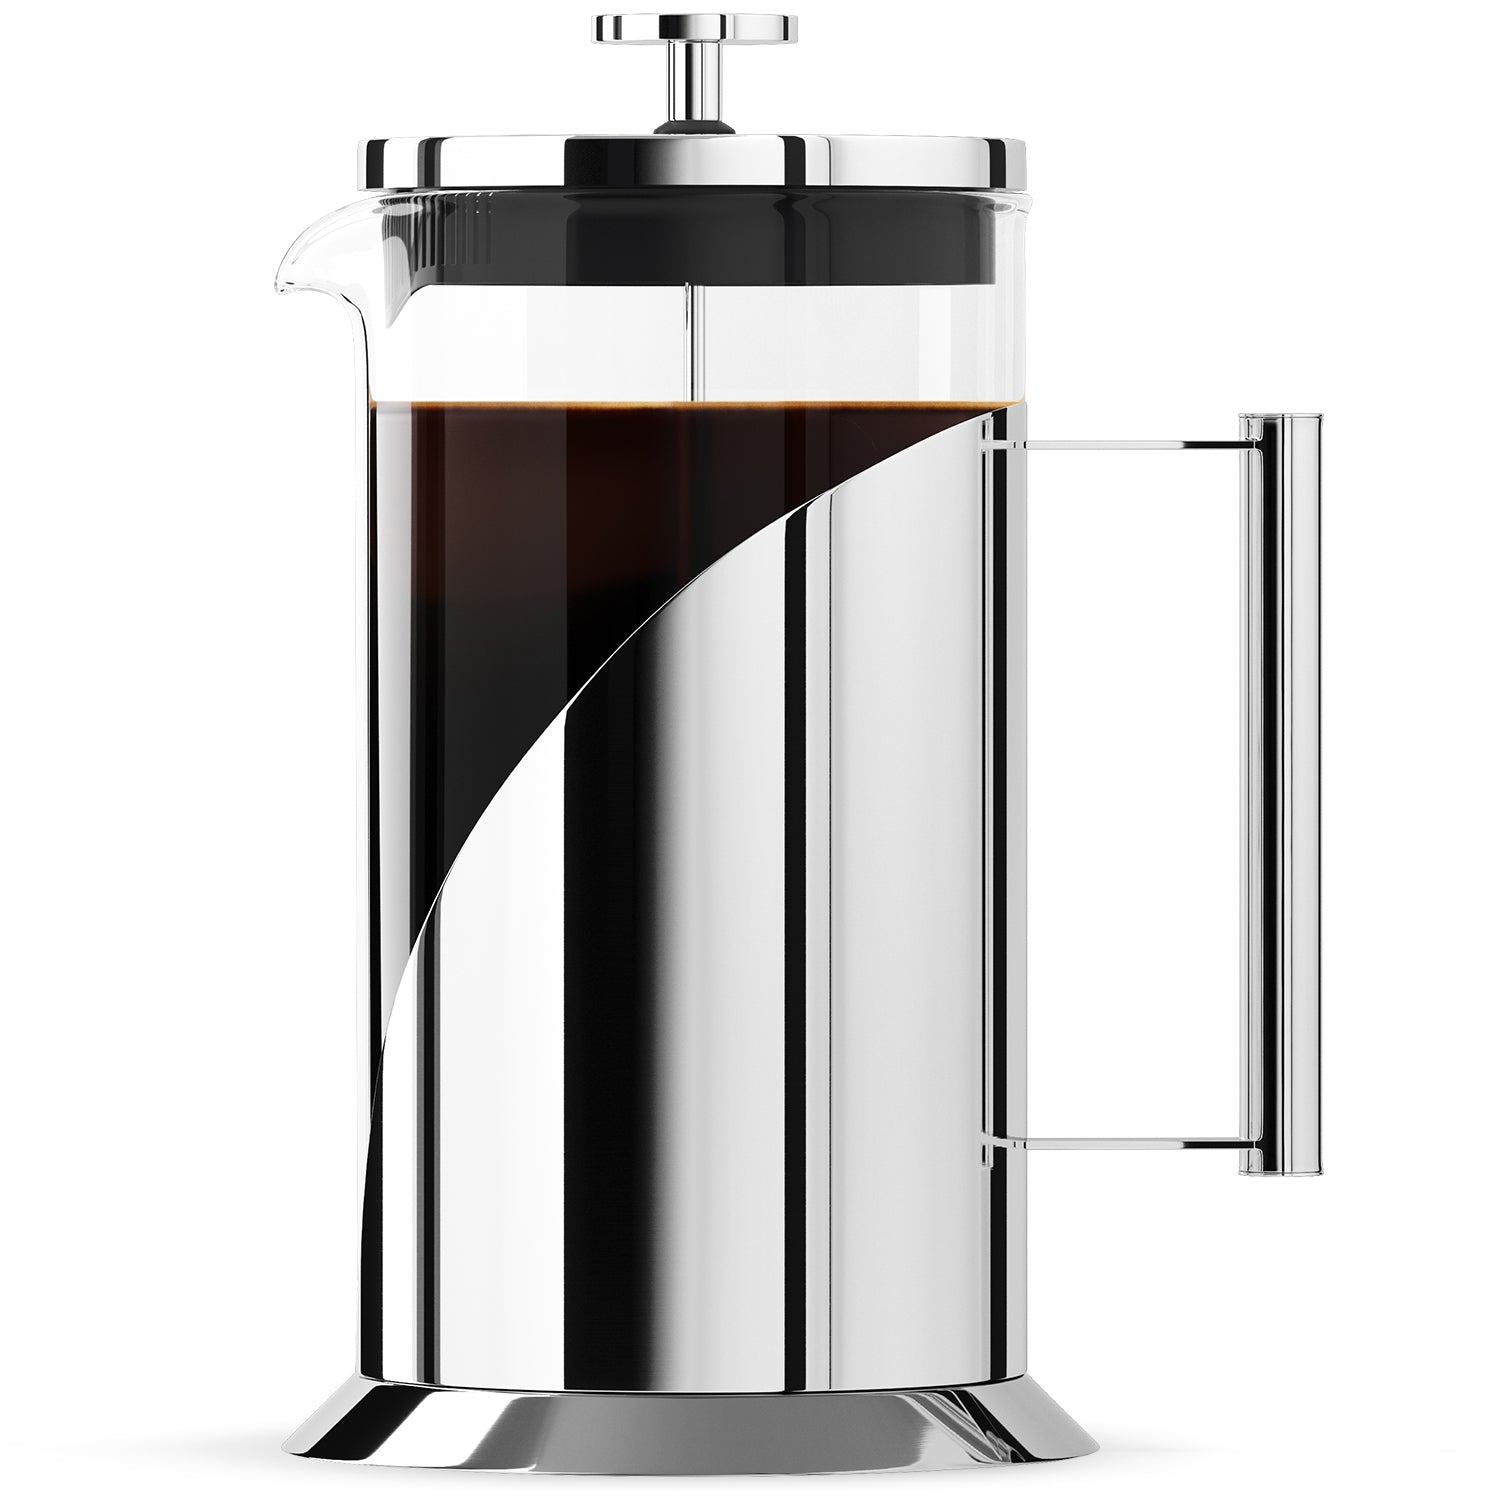 Cafe Du Chateau 34 Oz French Press Coffee Maker - Stainless Steel